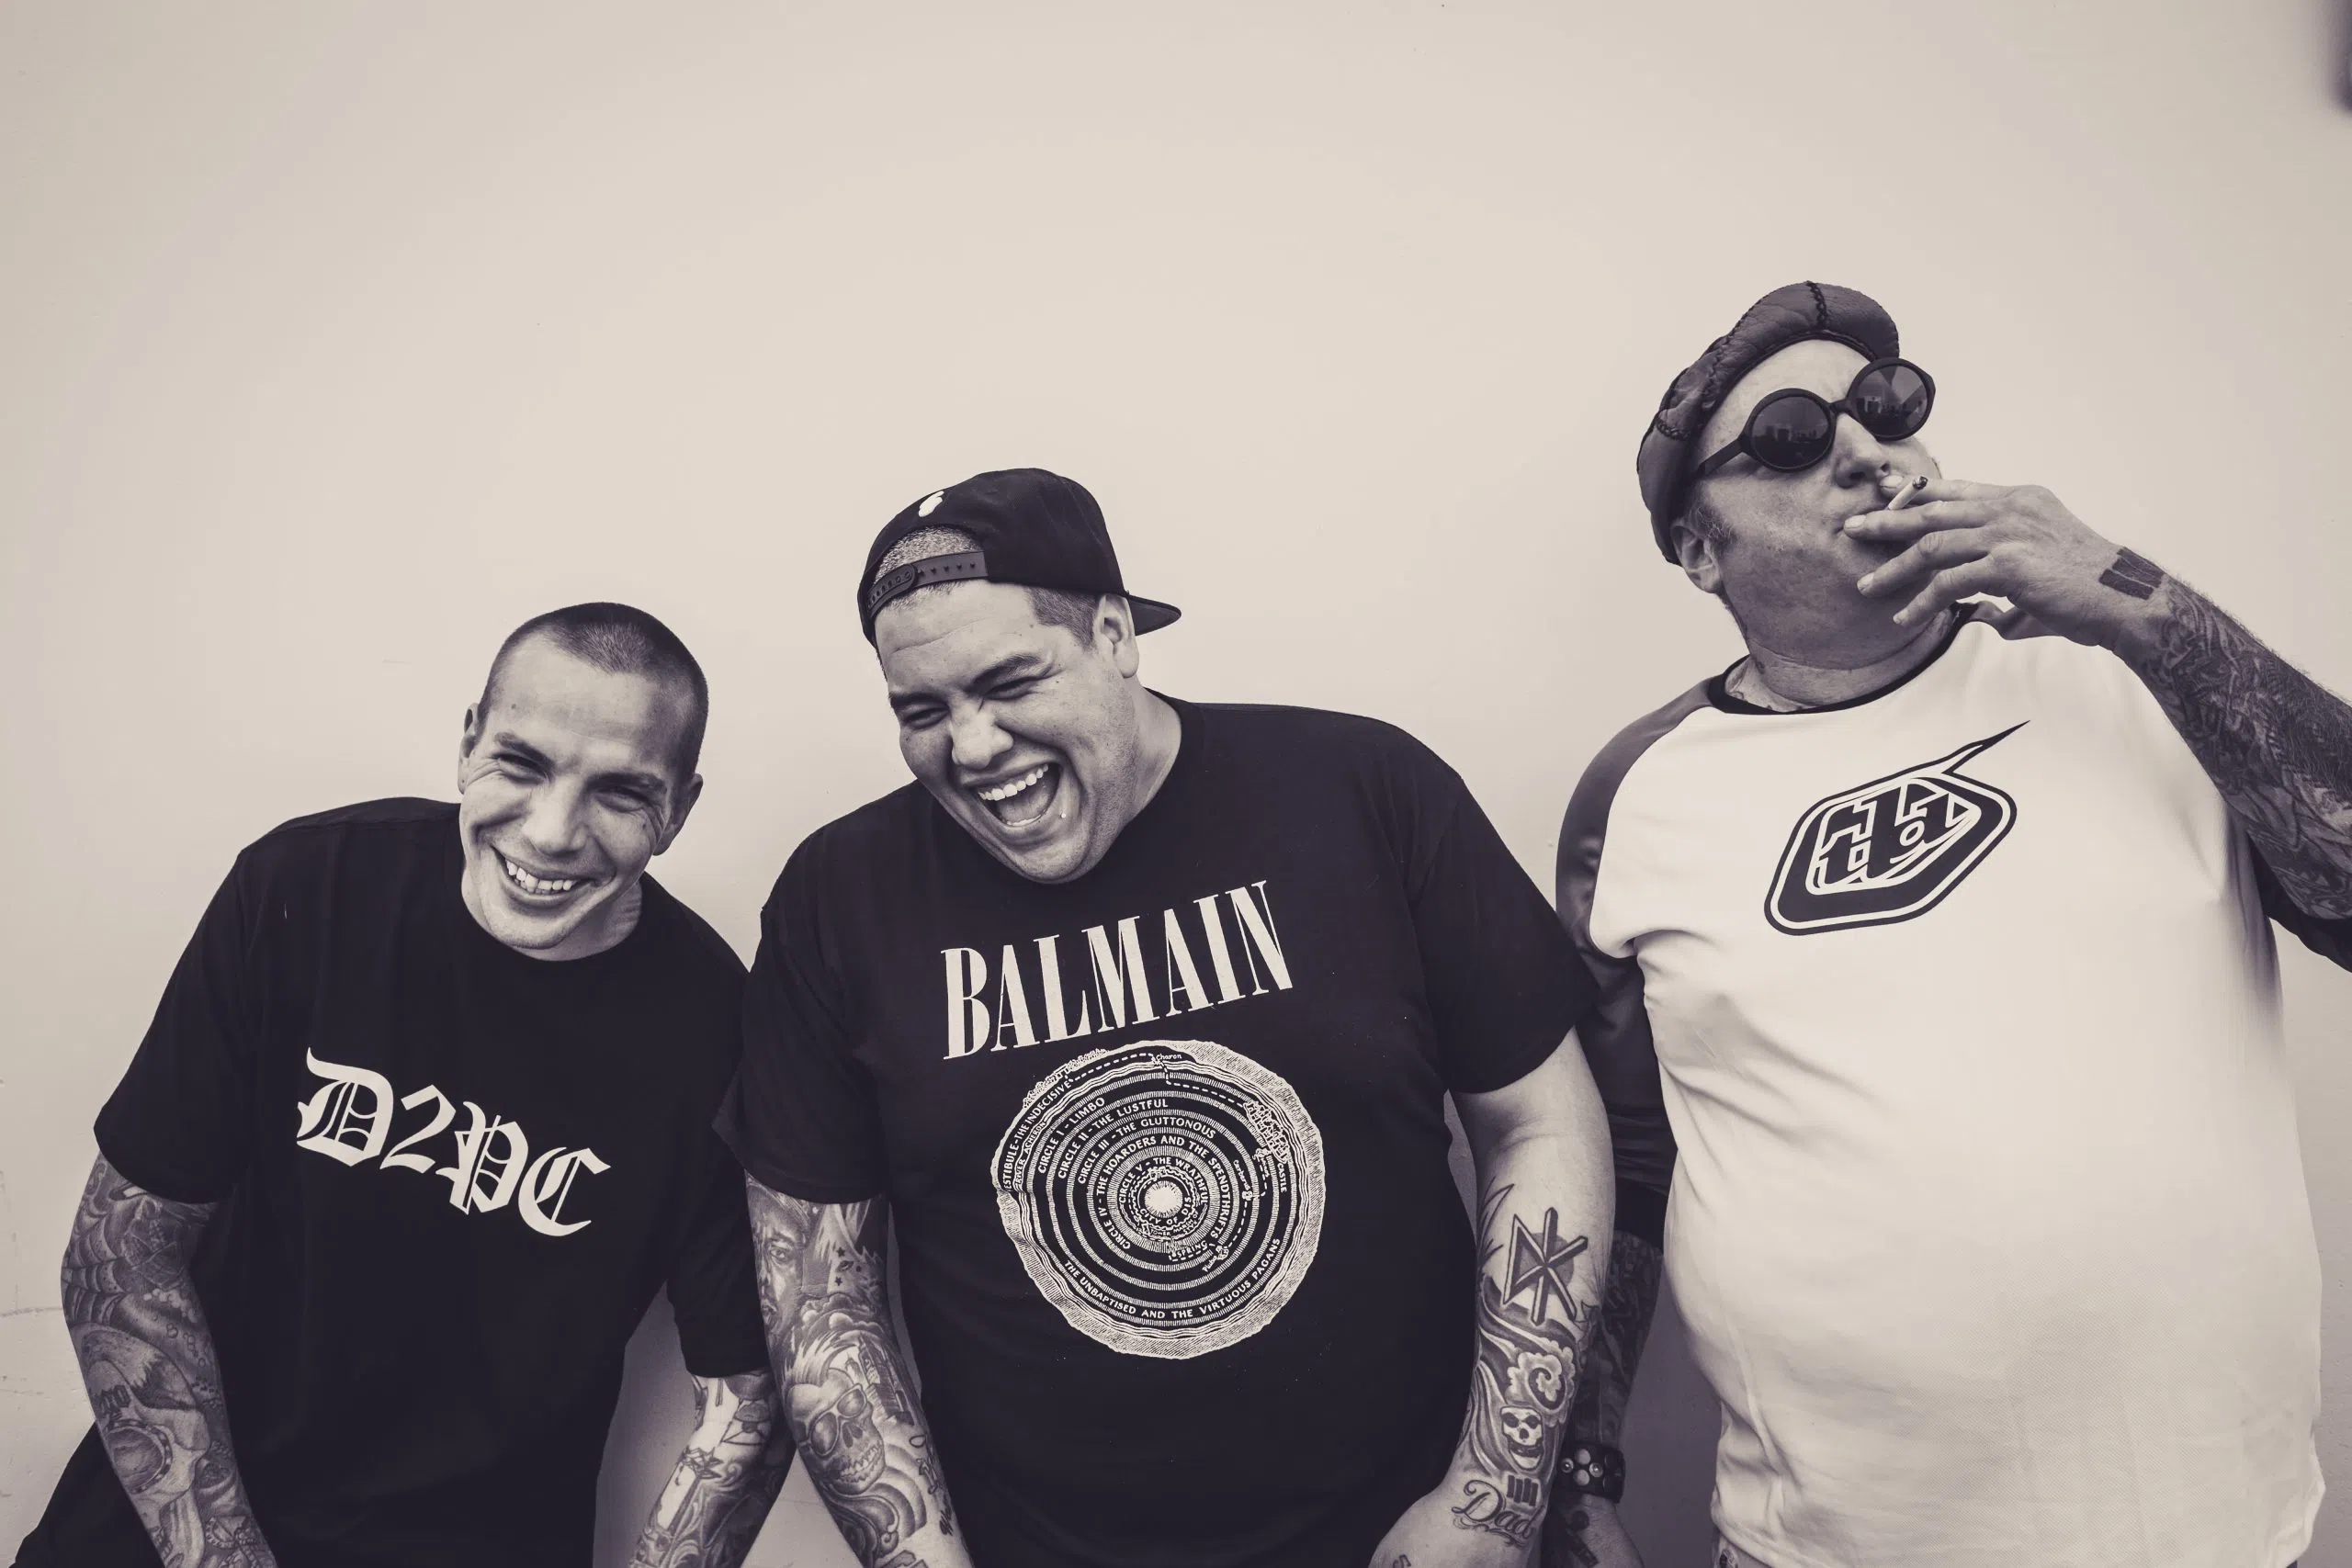 Sublime with Rome Press